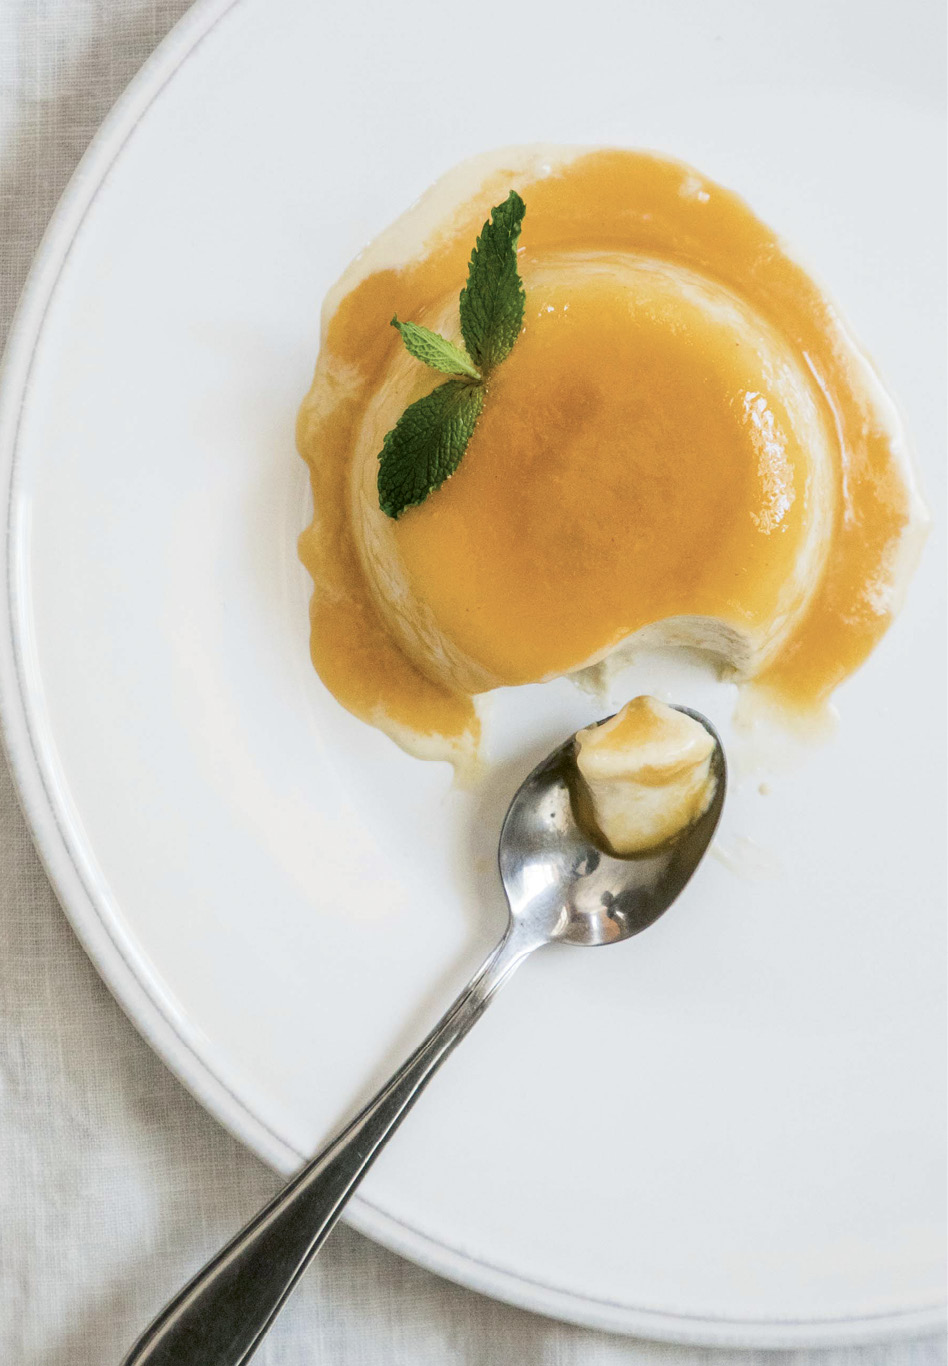 Panna cotta can be served with or without caramel sauce.